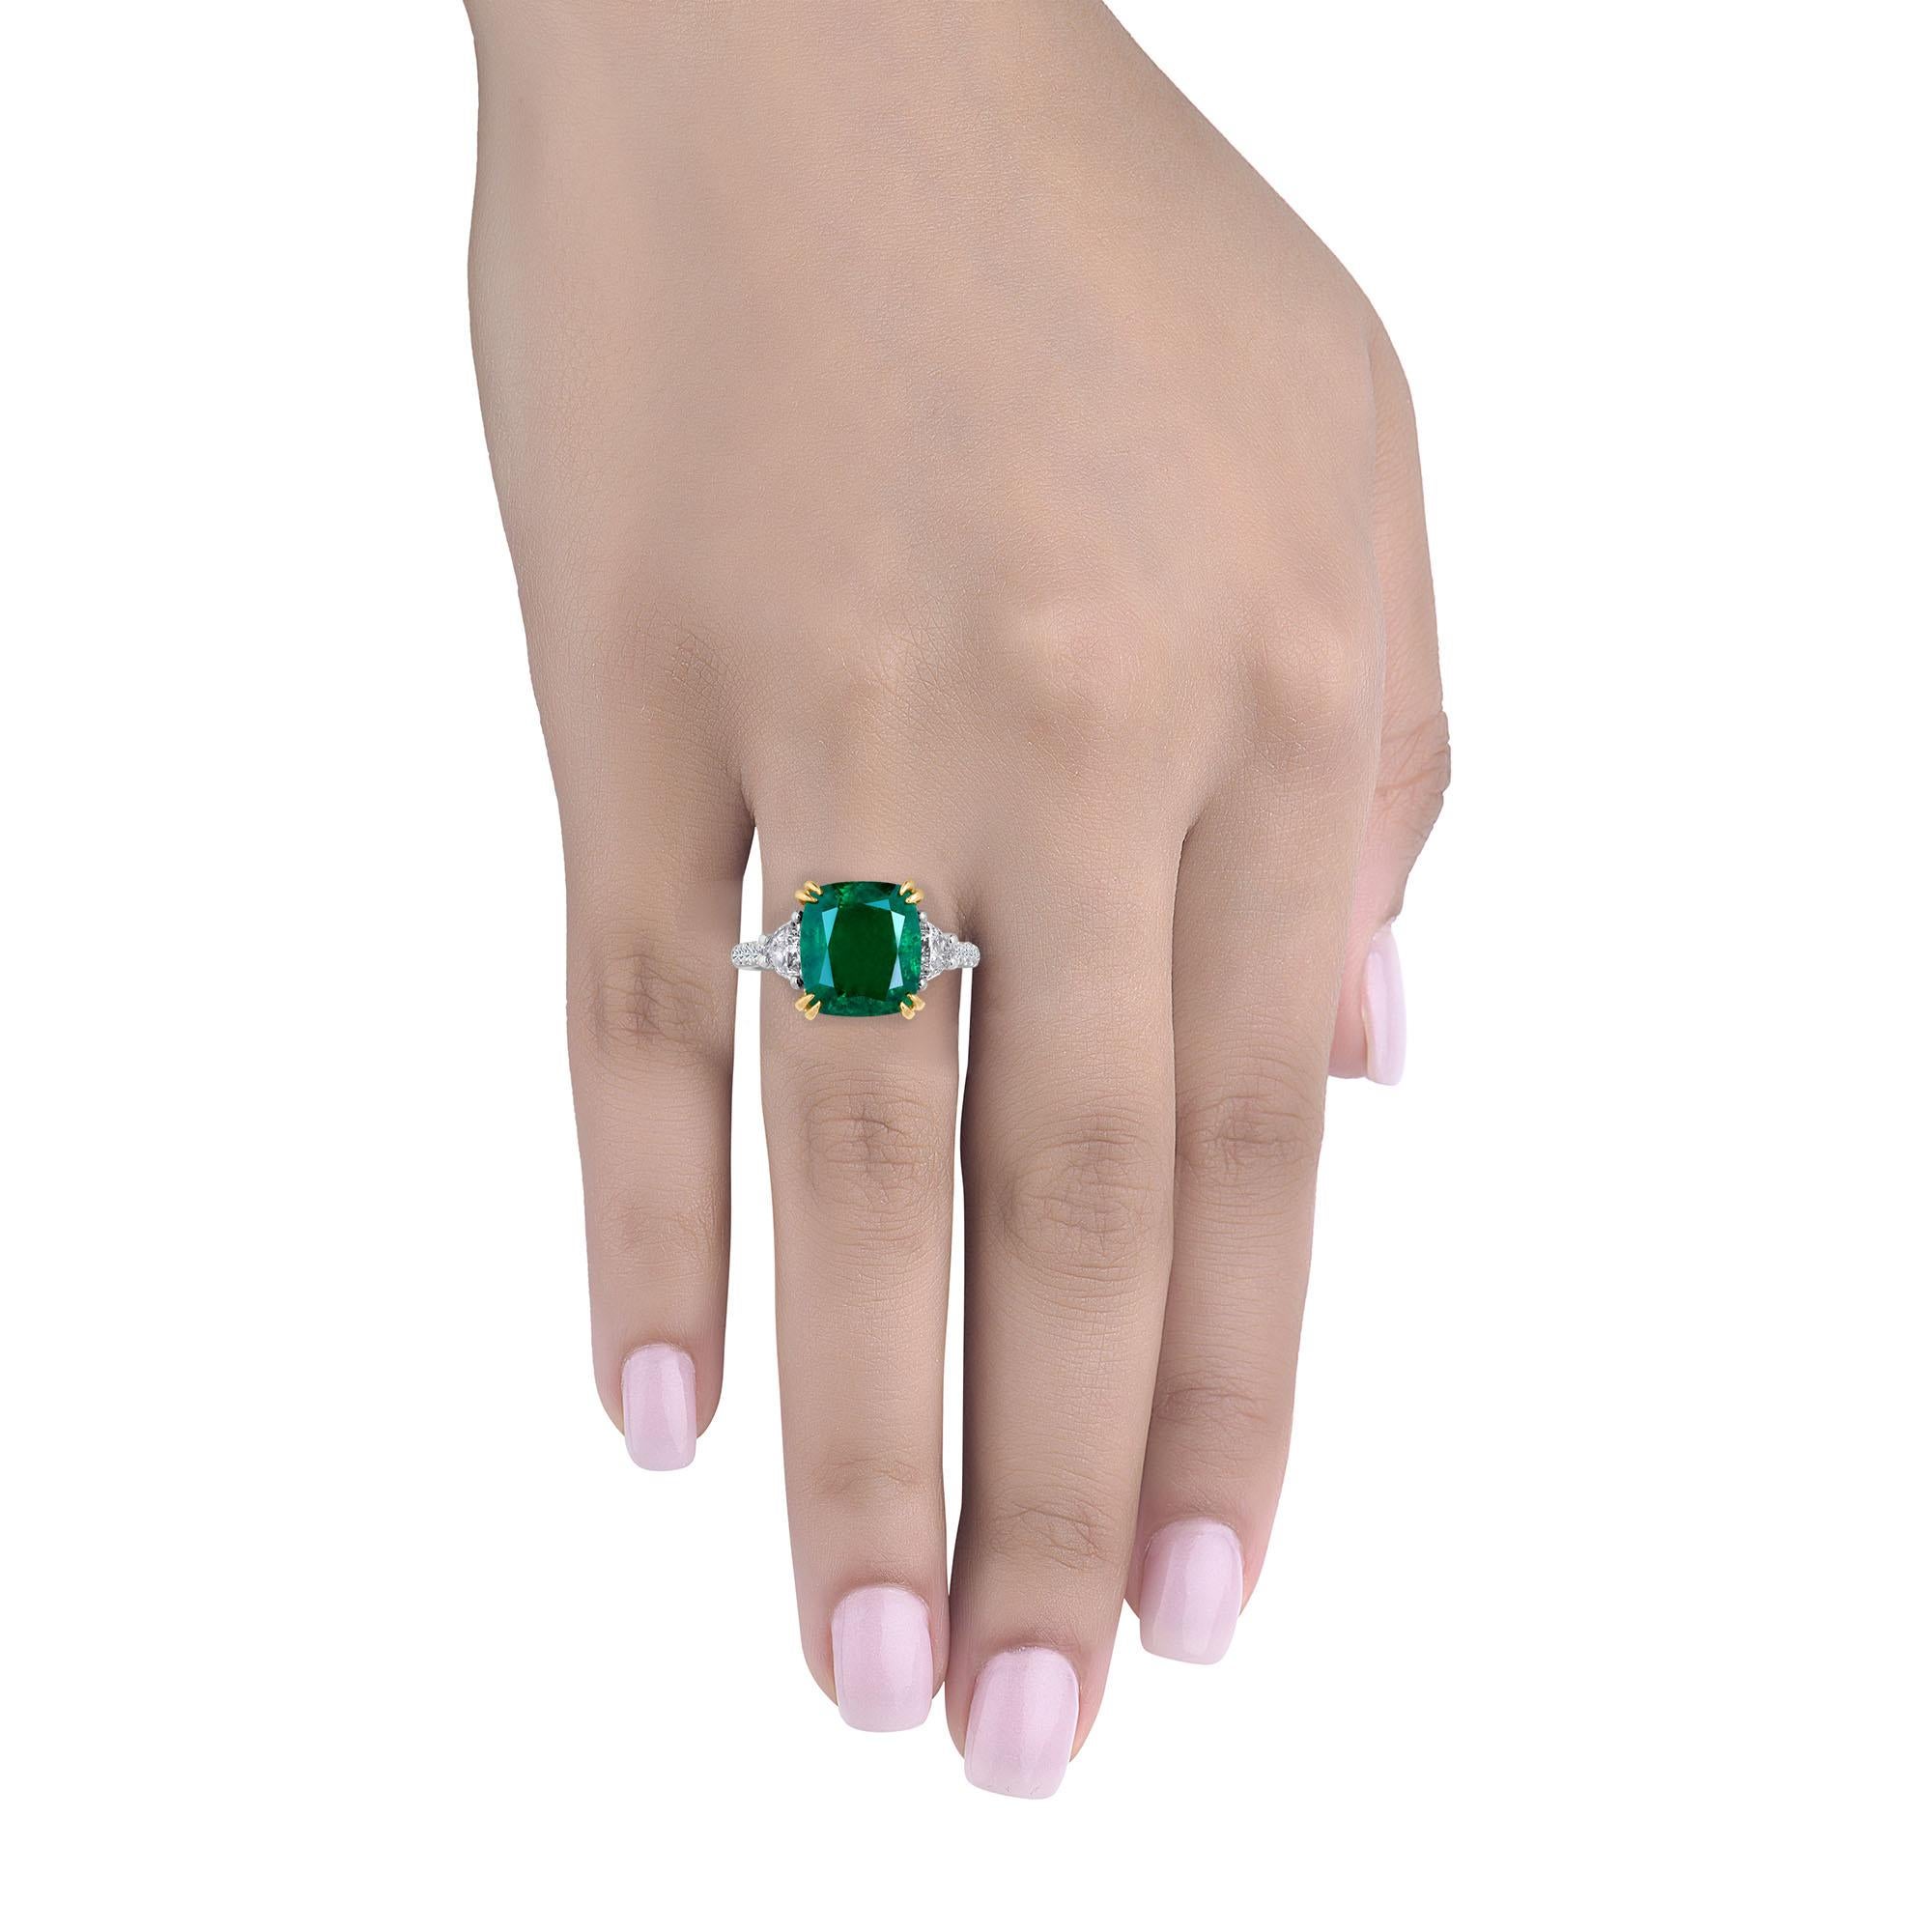 Hand made in the Emilio Jewelry Factory, A vivid green Cushion Zambian Emerald 5.00 Carat  cushion cut set in the center. The color and cutting on the emerald are exceptional and ideal. The emerald has an eye clarity vvs1. Many would consider this